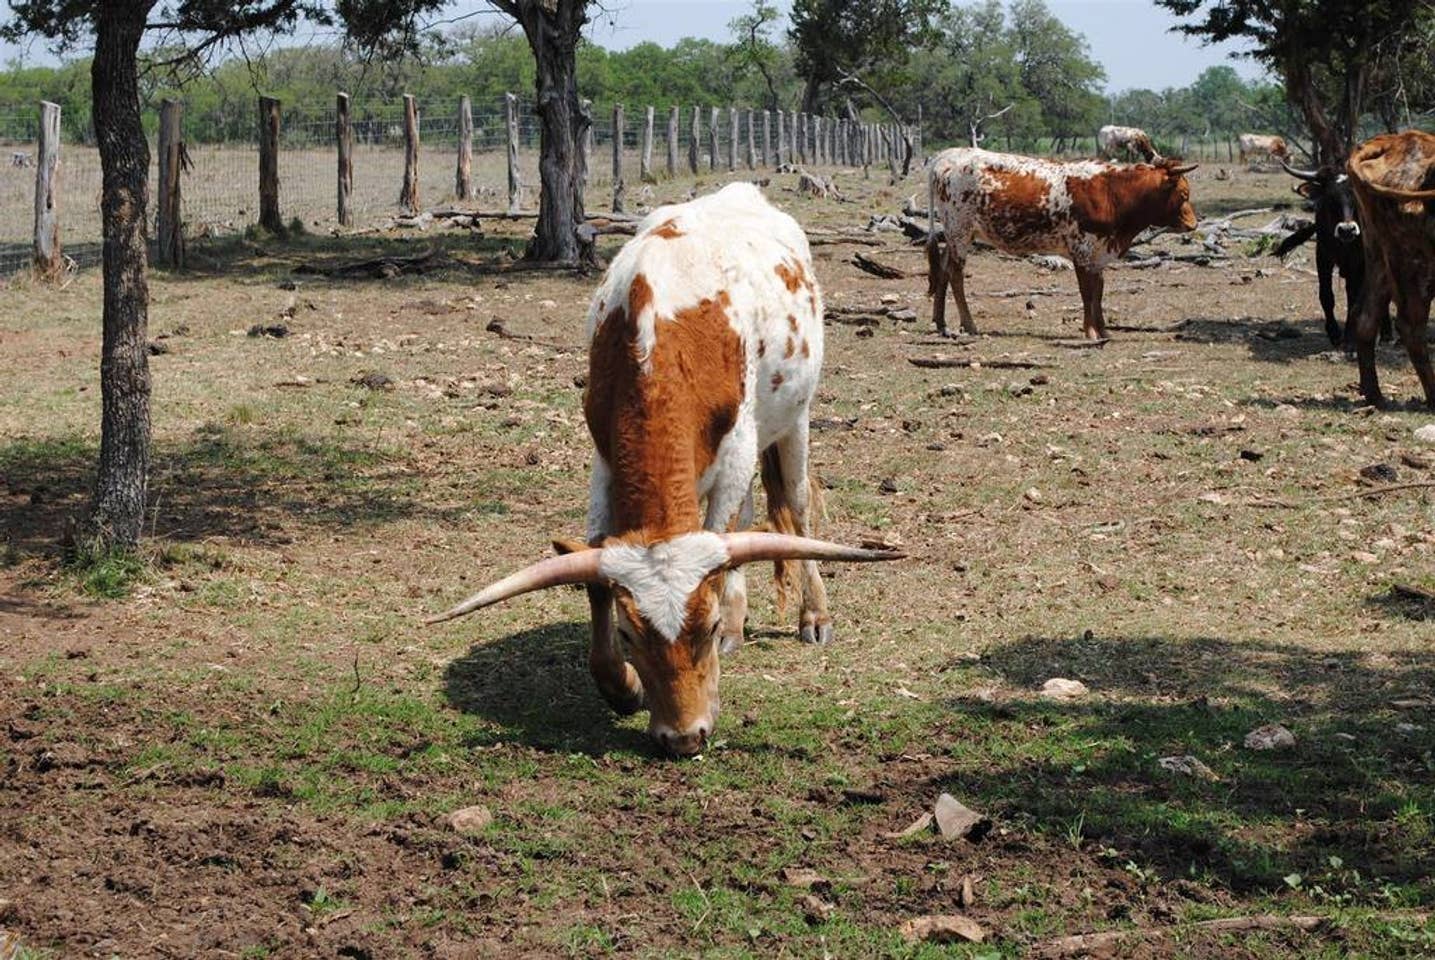                                                 Longhorns roam the pastures here, they're a Texas classic!